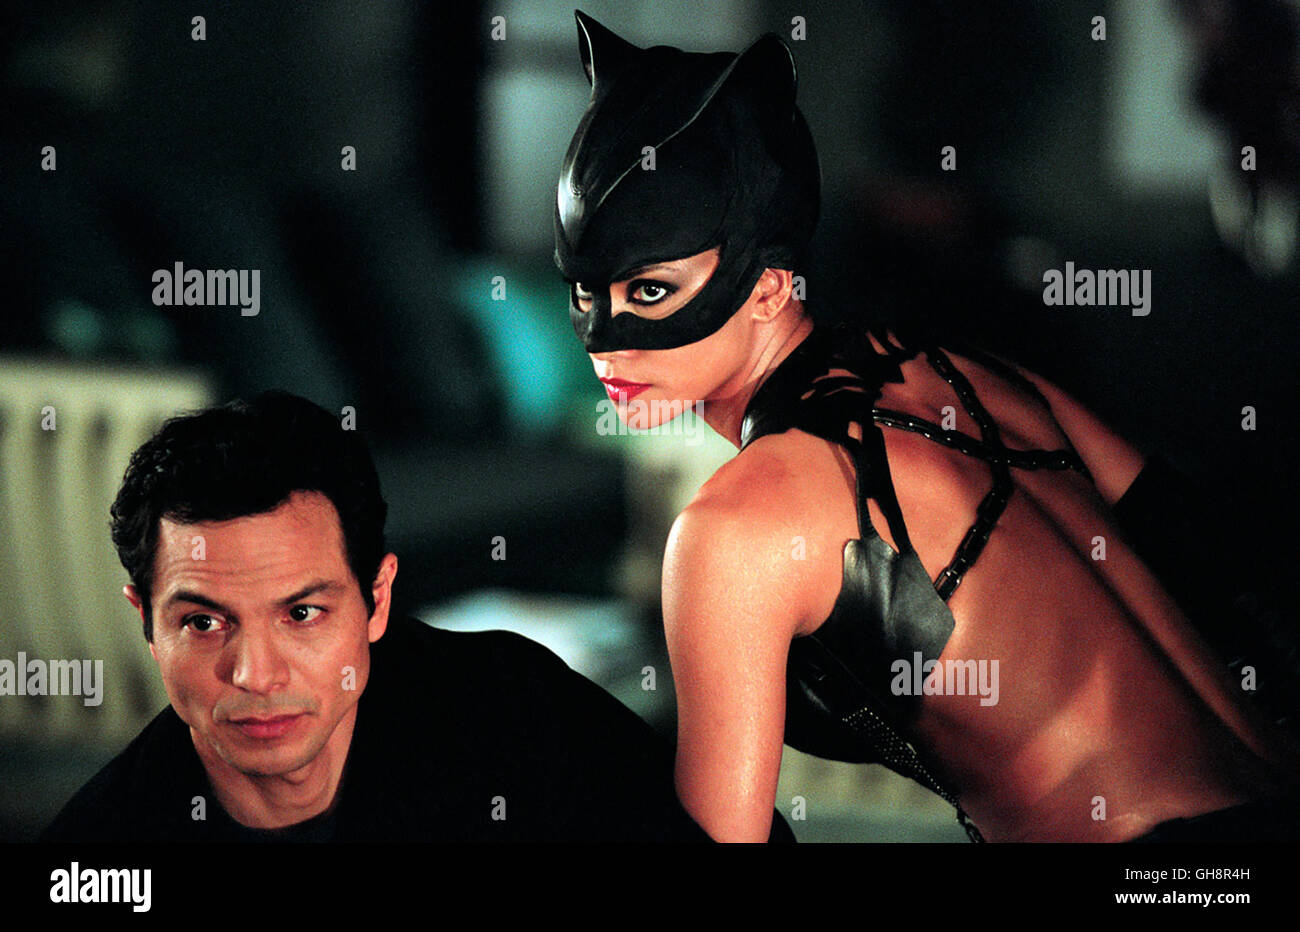 CATWOMAN / USA 2004 / Pitof Tom Lone (BENJAMIN BRATT) und Patience Philips (Halle Berry) Régie : Pitof Banque D'Images